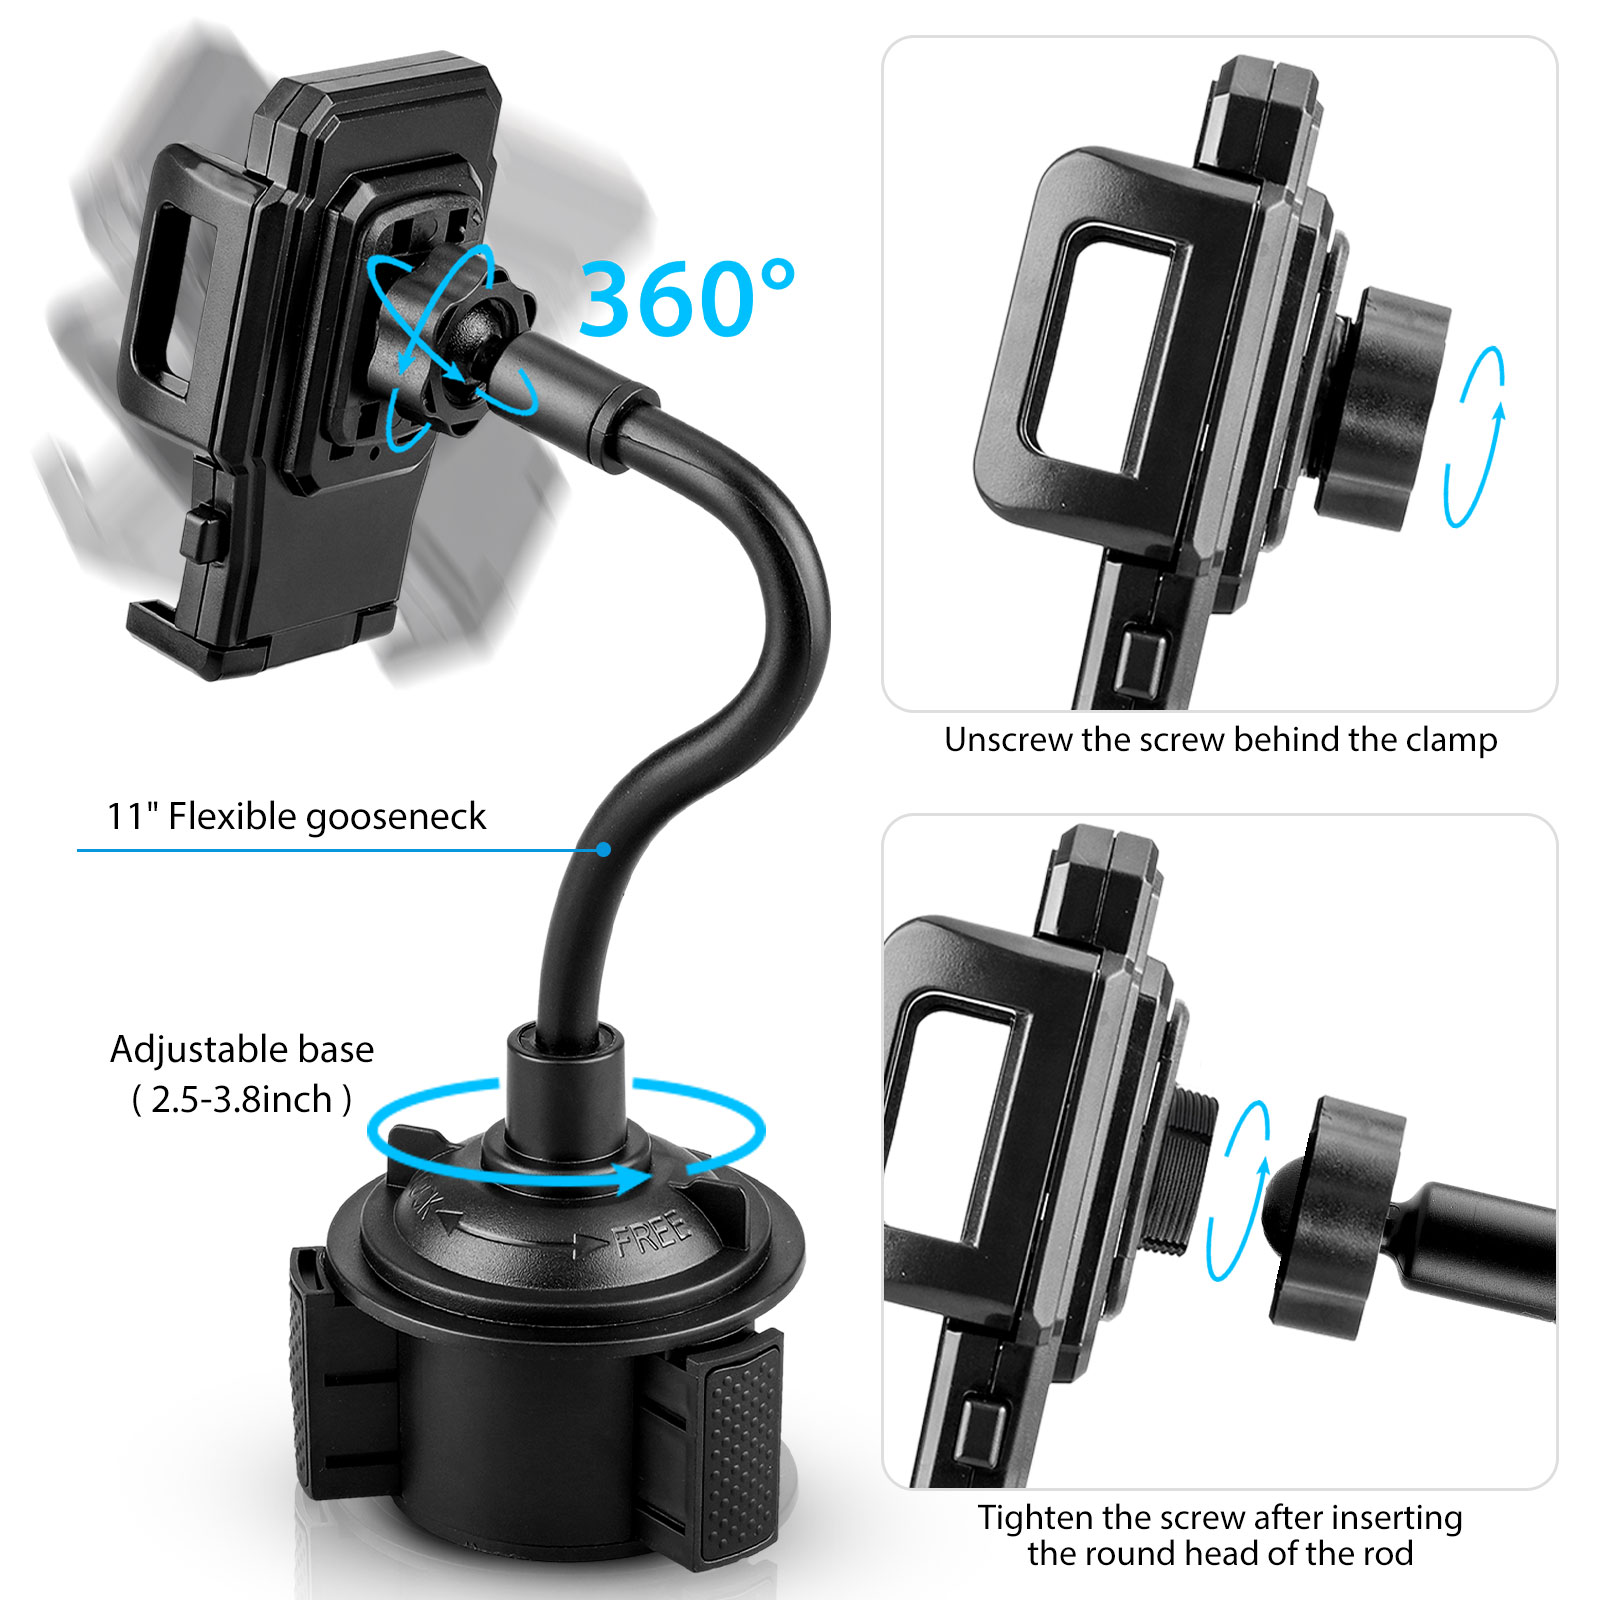 Car Phone Mount, EEEkit Universal Cell Phone Holder, Car Cup Holder Mount Fit for iPhone 13 12 Pro Max 11 Xs Max R X 8 Plus, Samsung Galaxy S21 S20 S10 and More - image 5 of 11